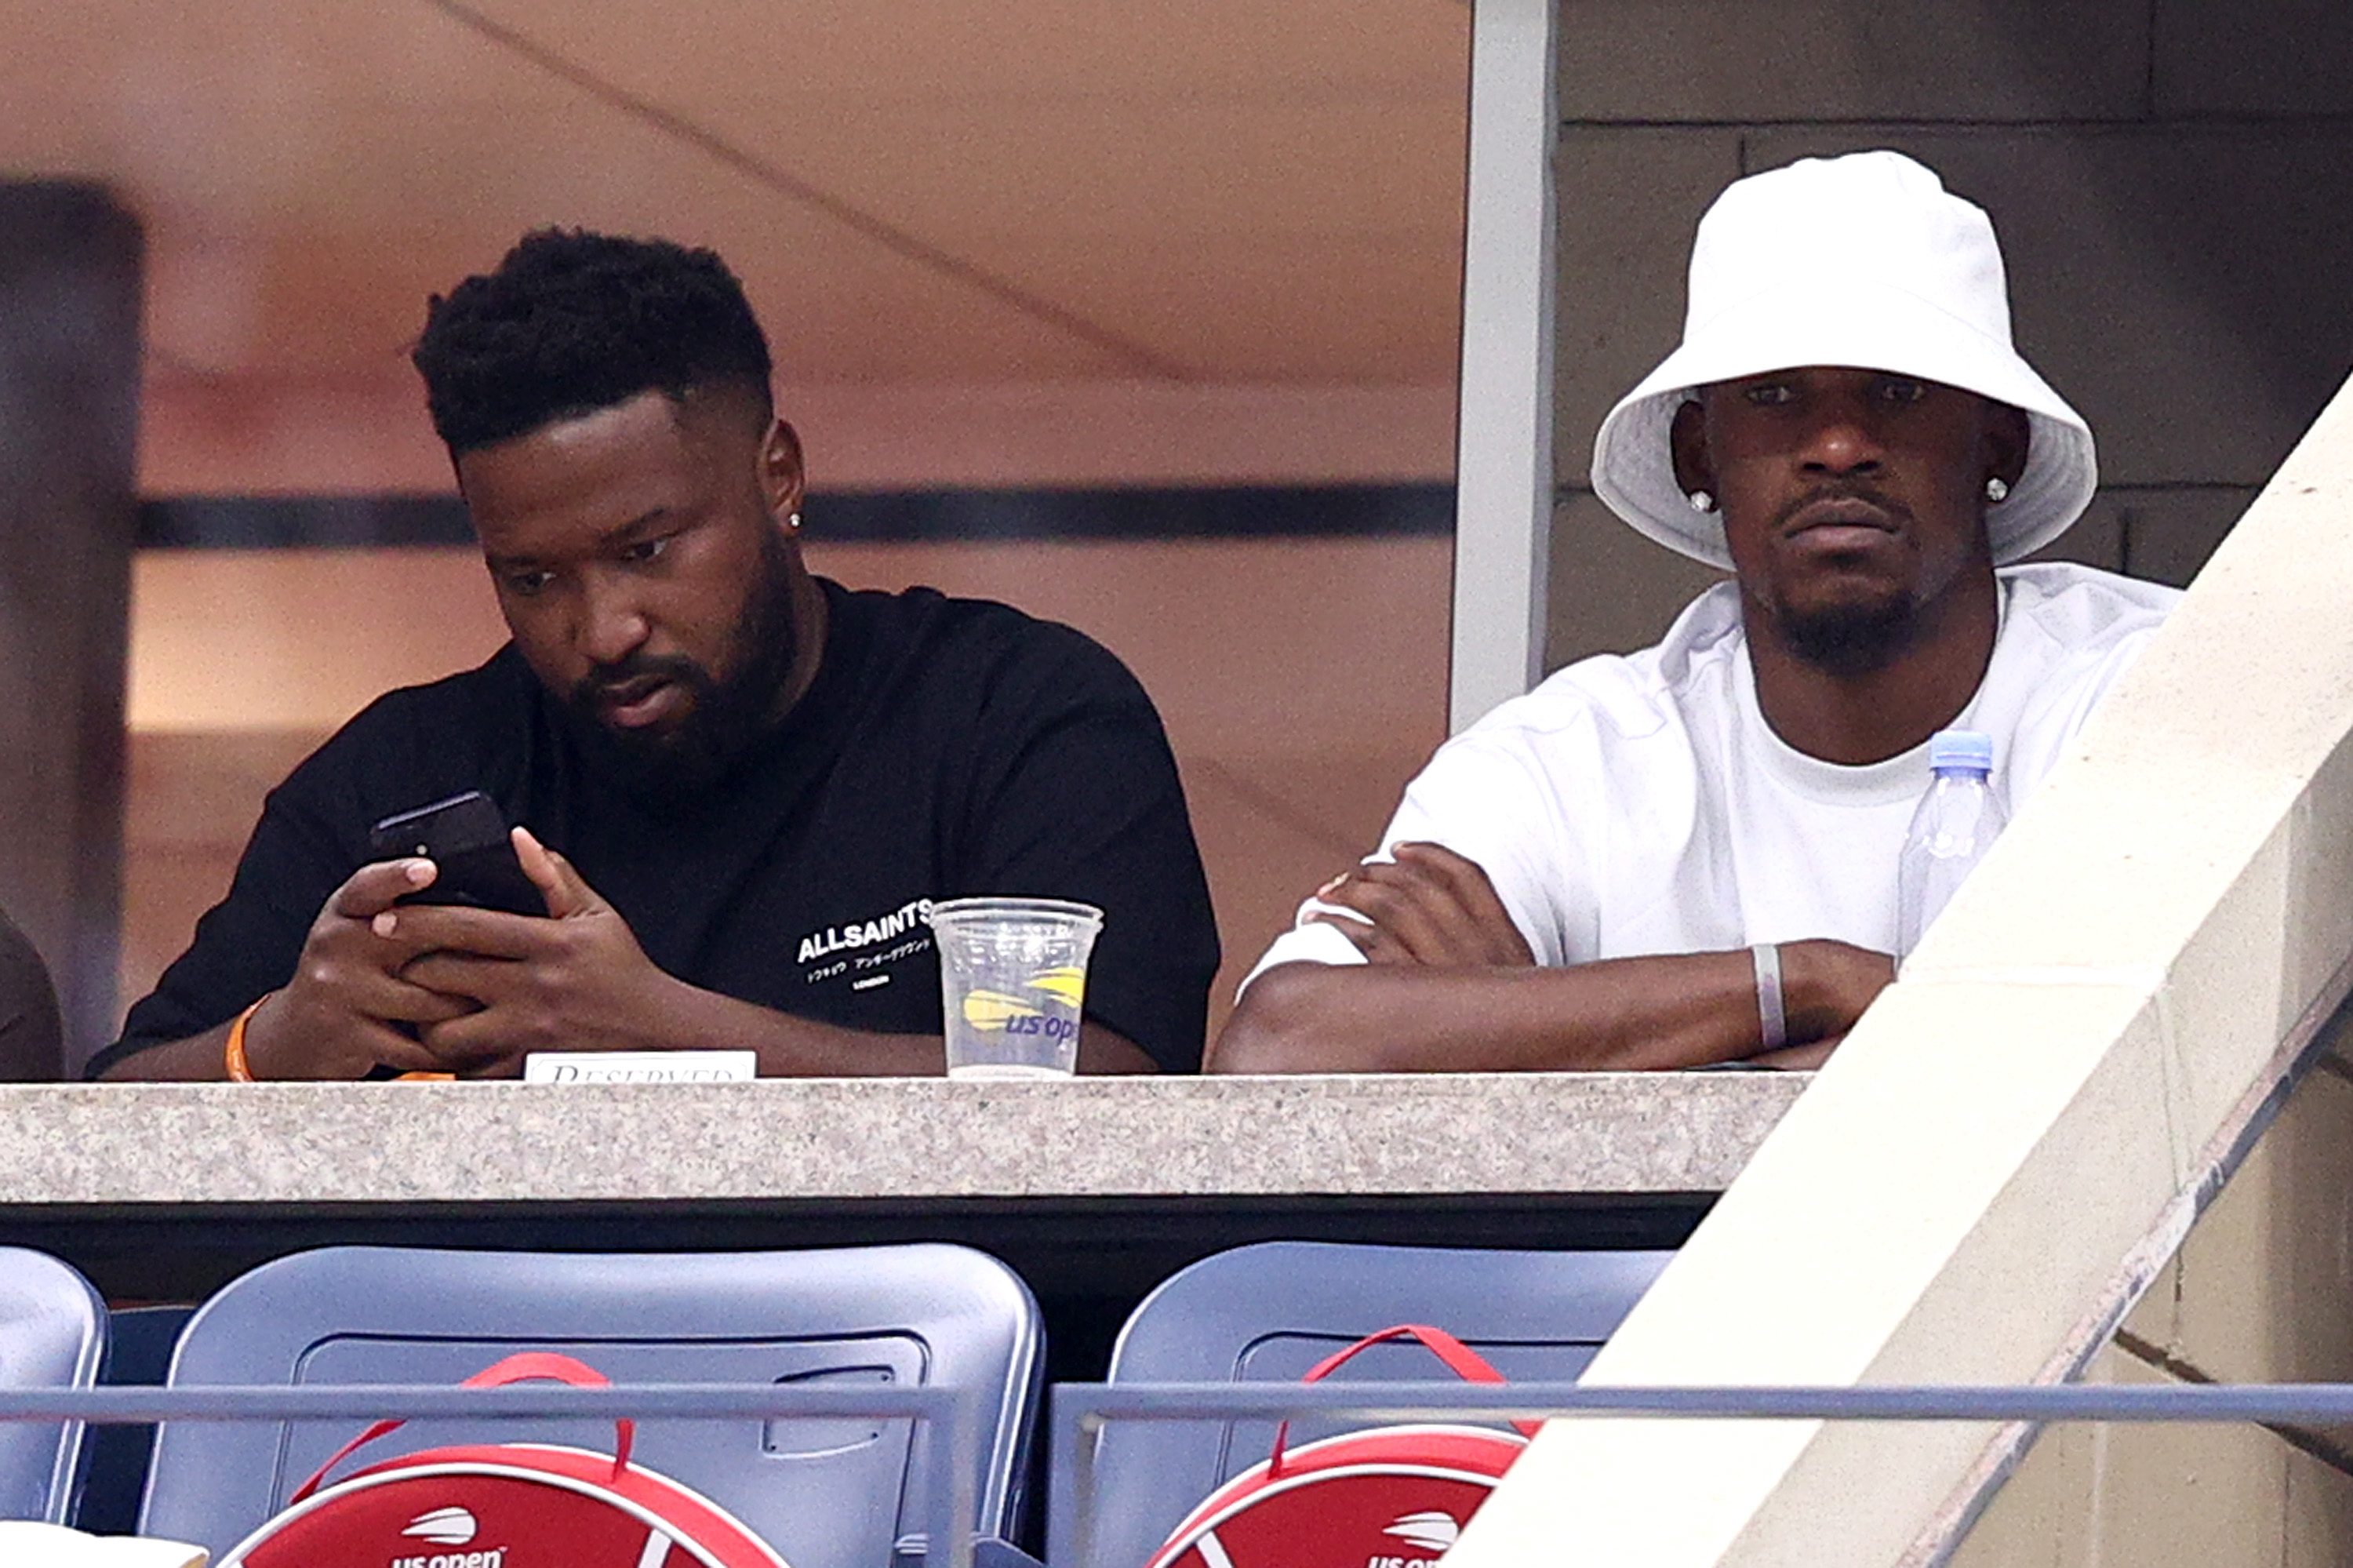 Jimmy Butler wearing a bucket hat as he sits with a friend